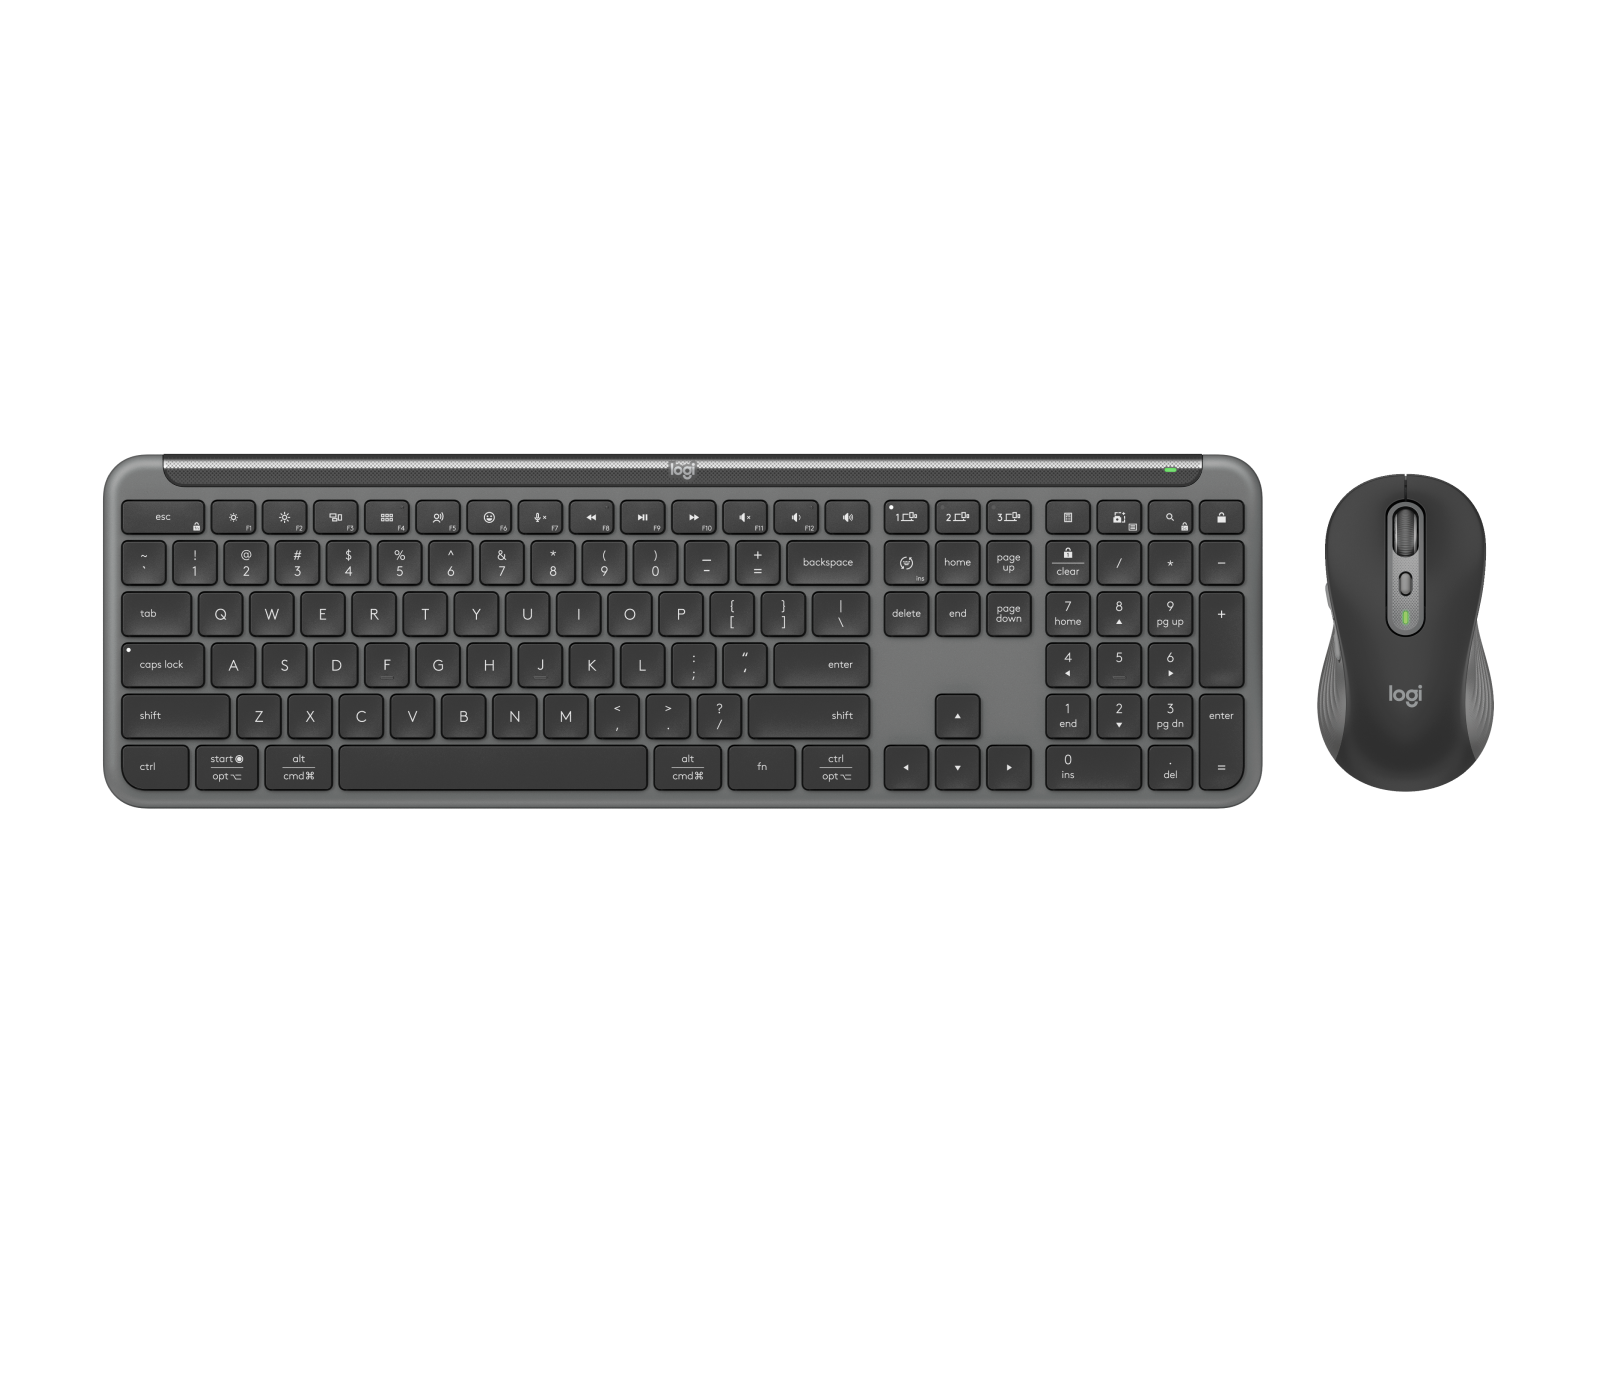 Logitech Buy Signature Slim Keyboard Mouse Combo MK955 in Graphite